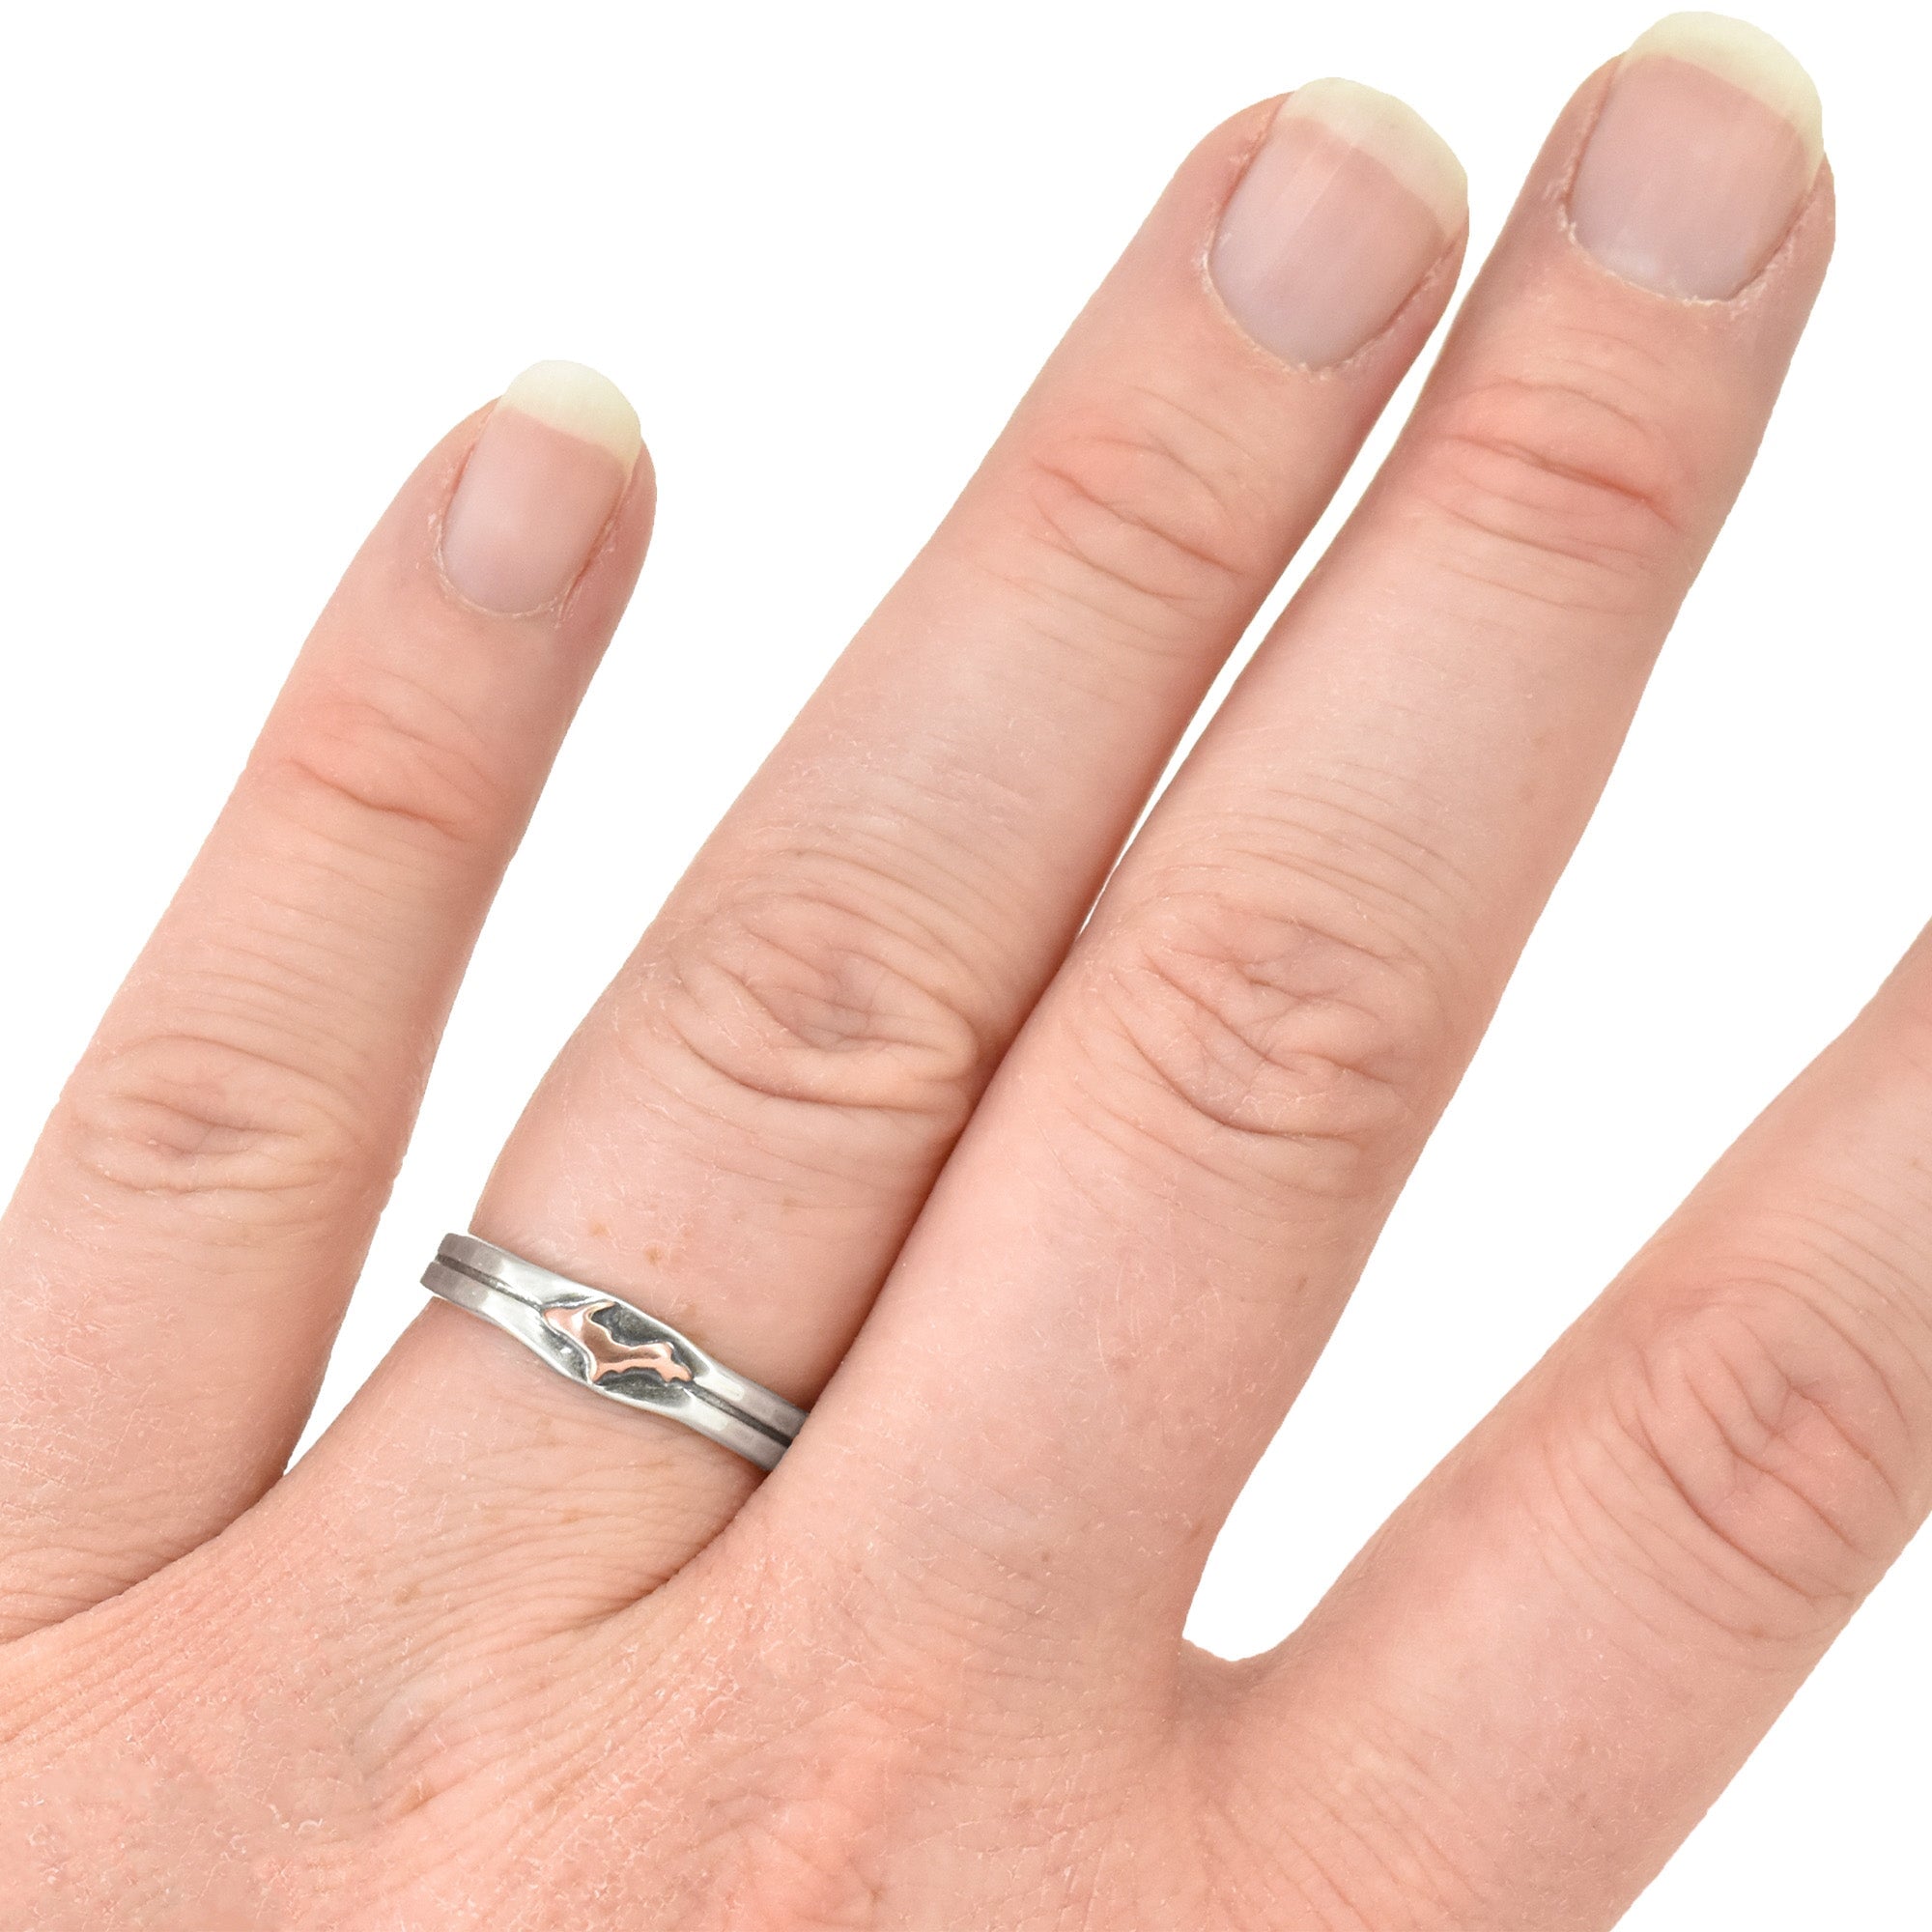 Upper Peninsula Double Stack Ring - Ring Select Size 4 7095 - handmade by Beth Millner Jewelry